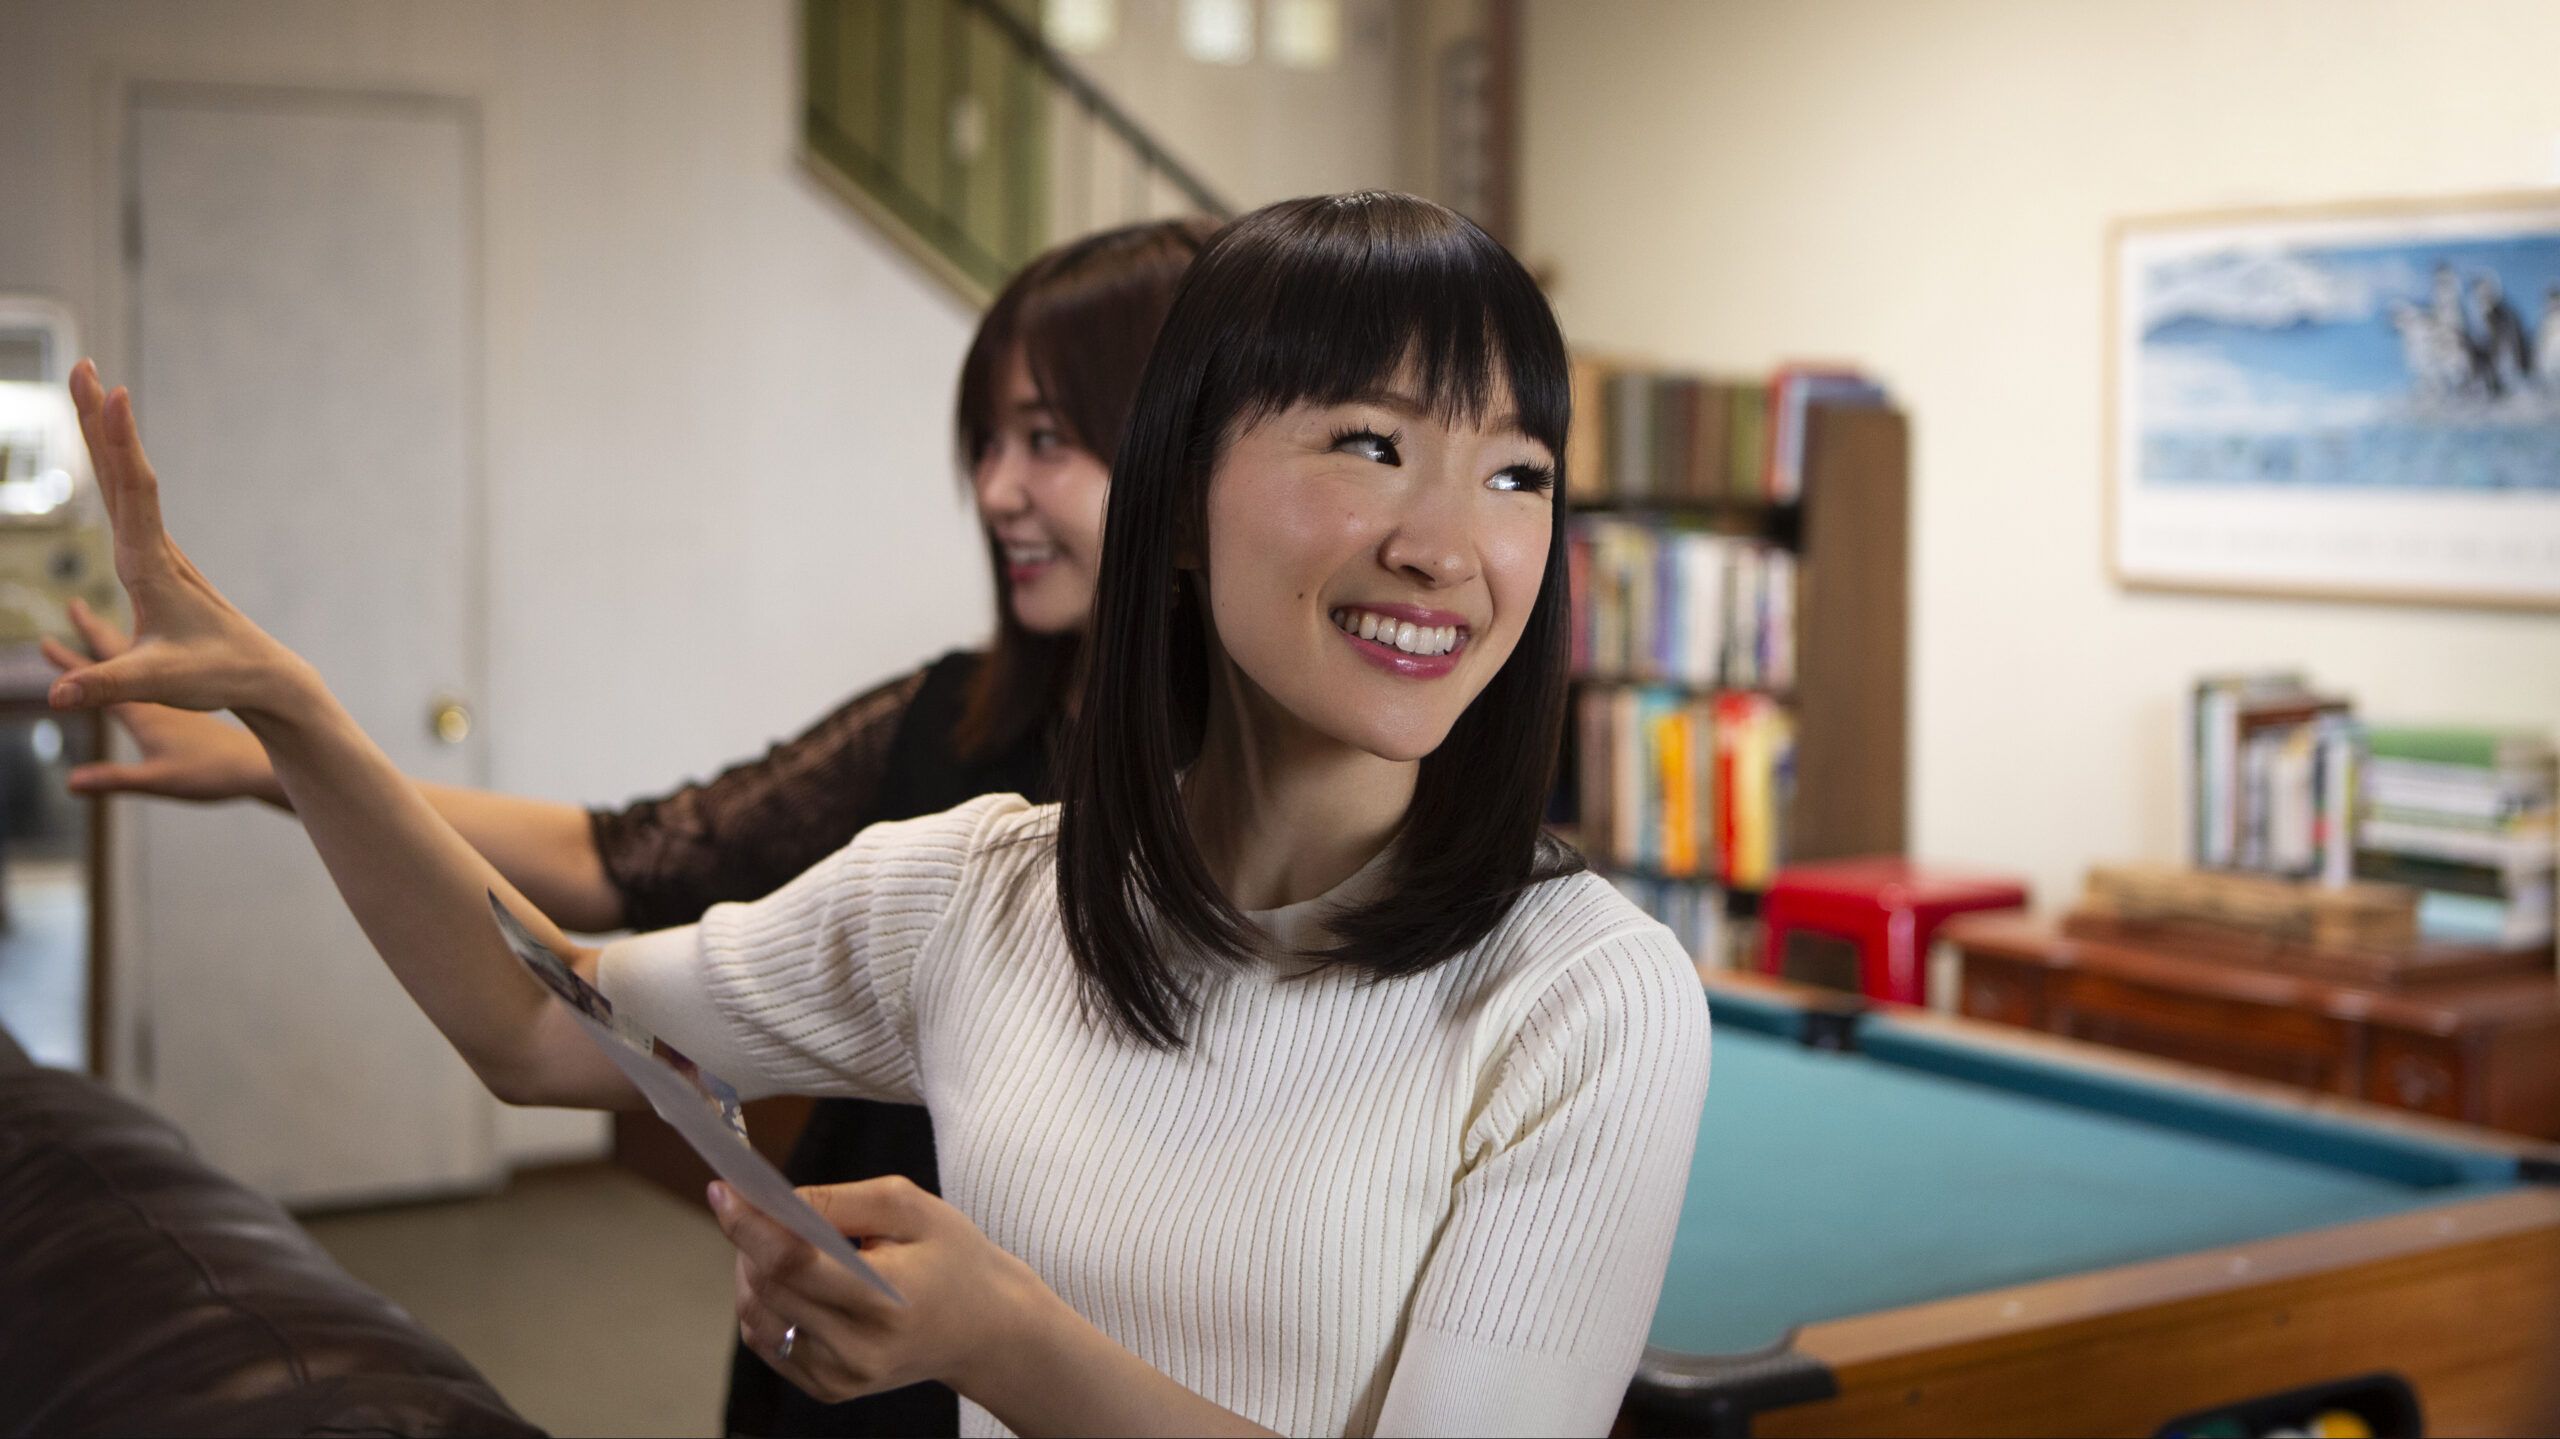 Marie Kondo Shares Her Organizing Tips with New Book Spark Joy: An